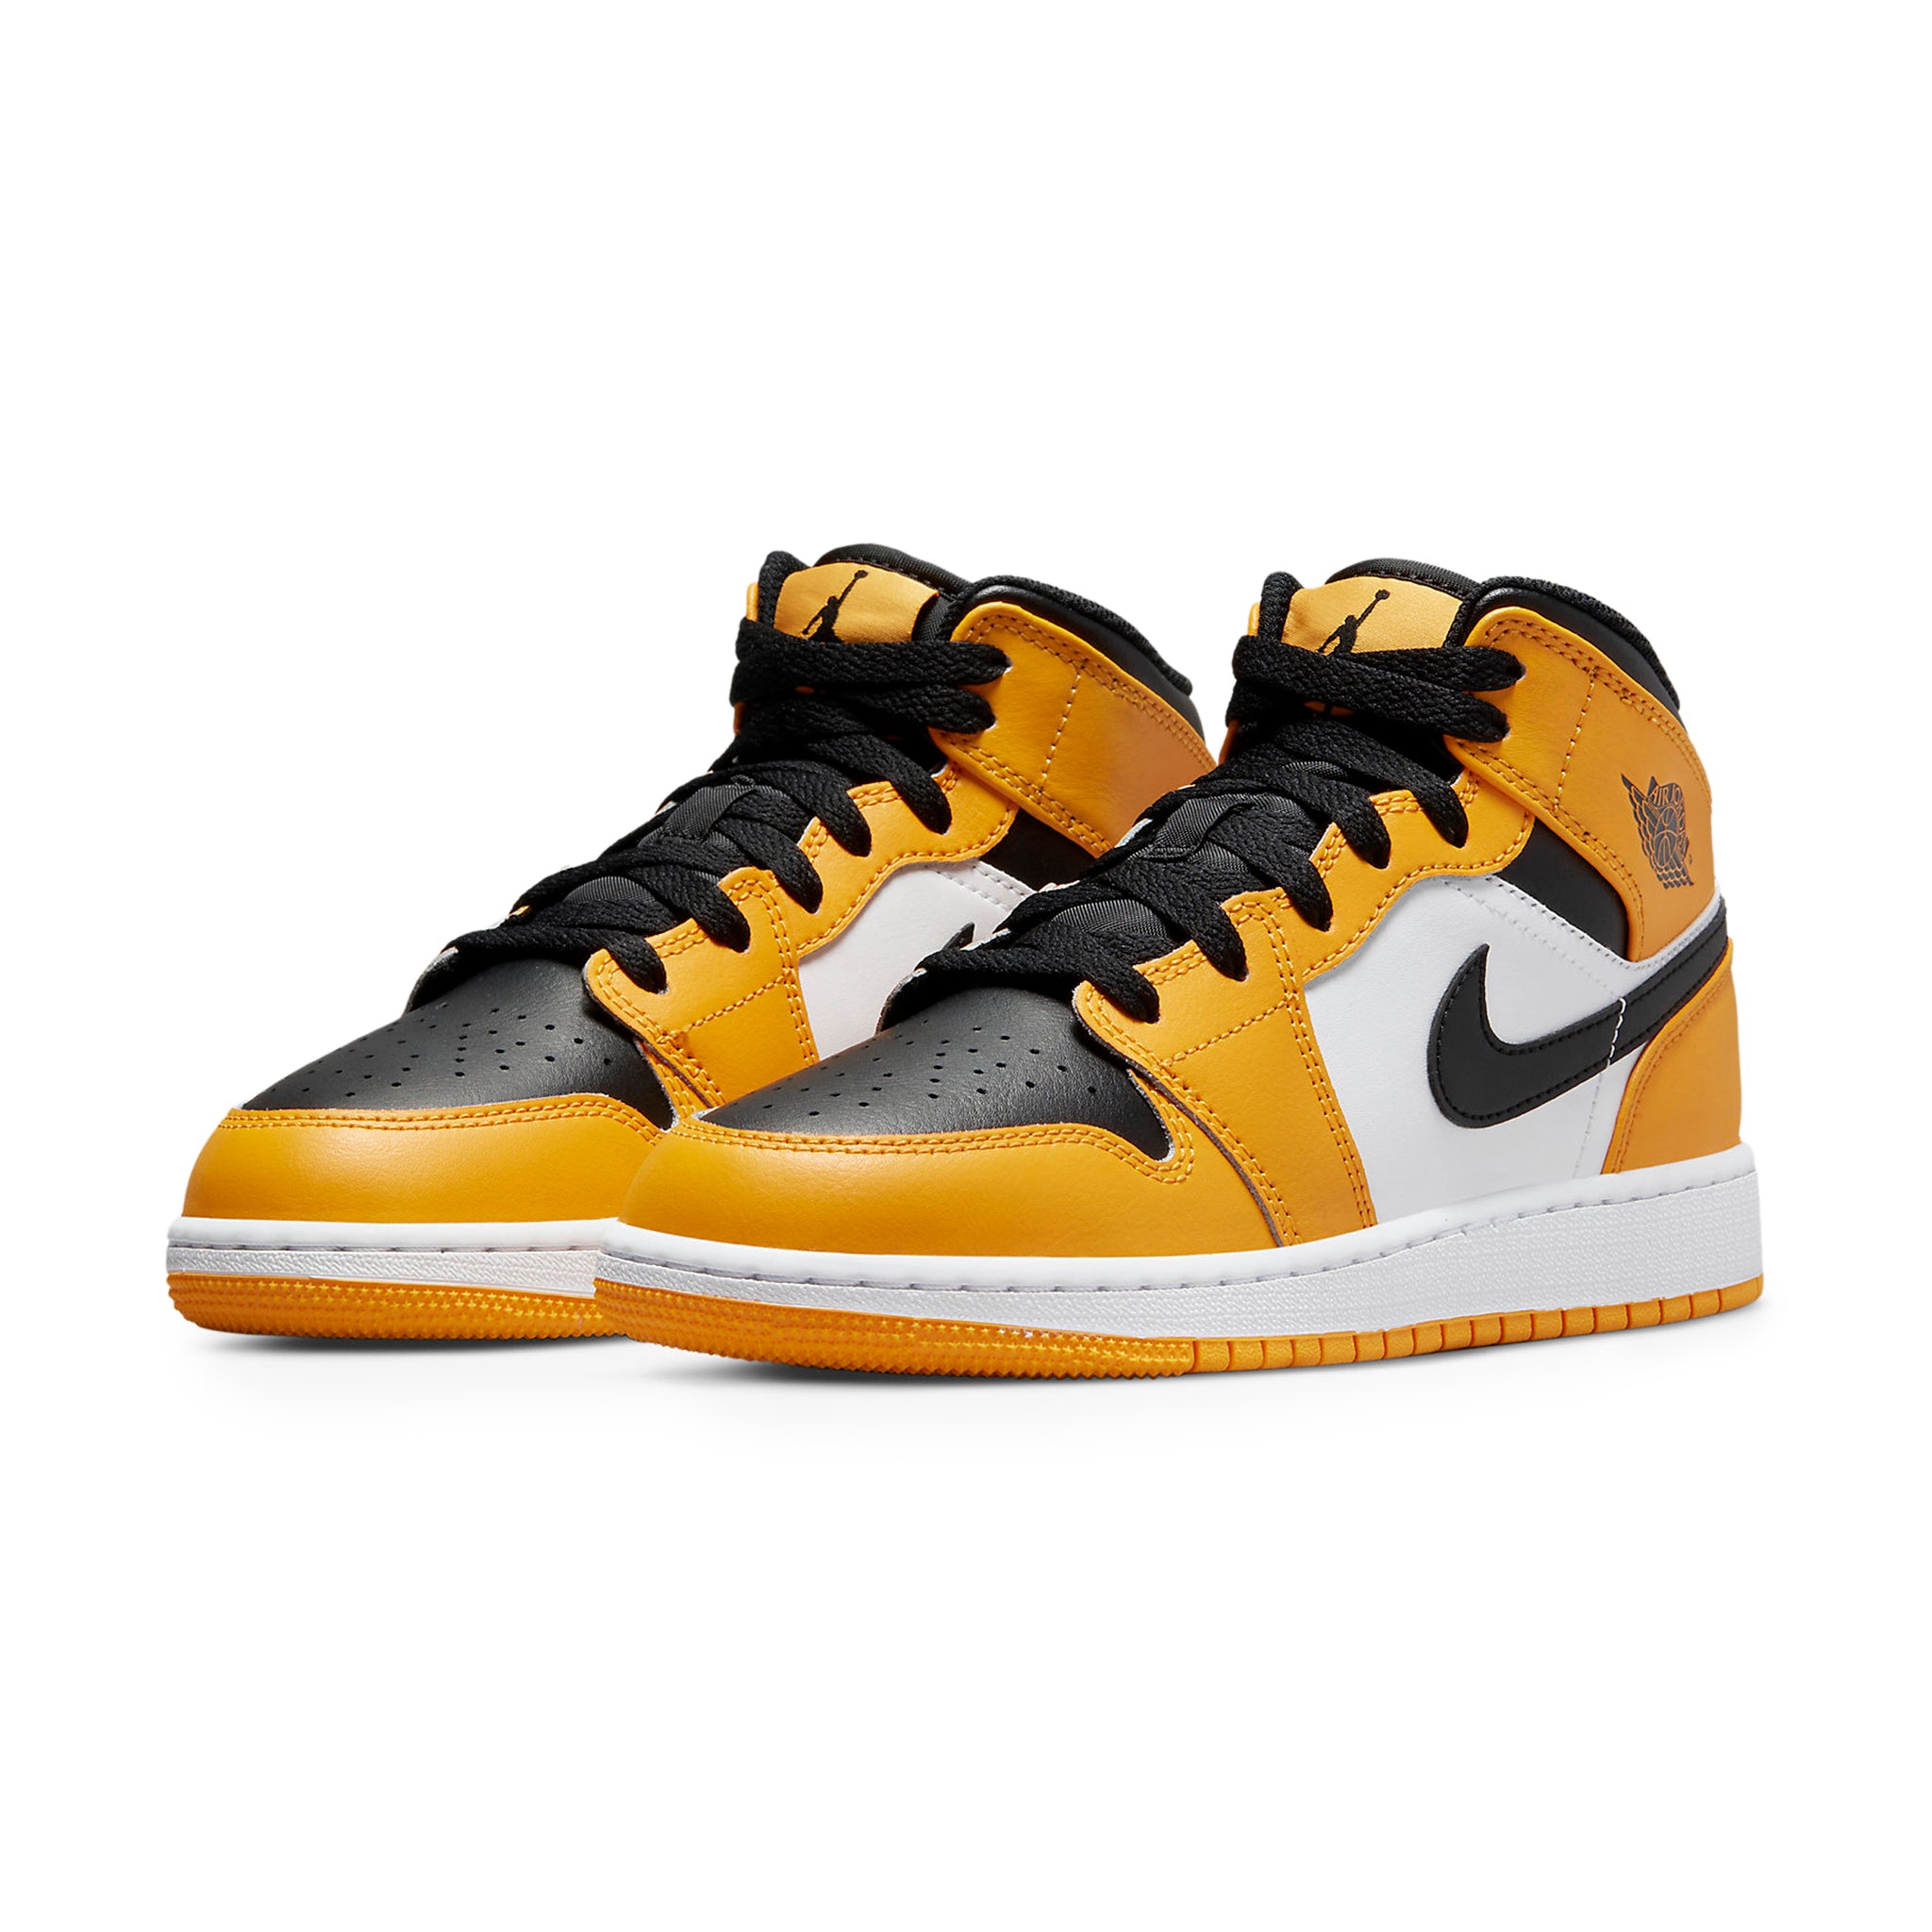 Front side view of Air Jordan 1 Mid Taxi (GS) 554725-701